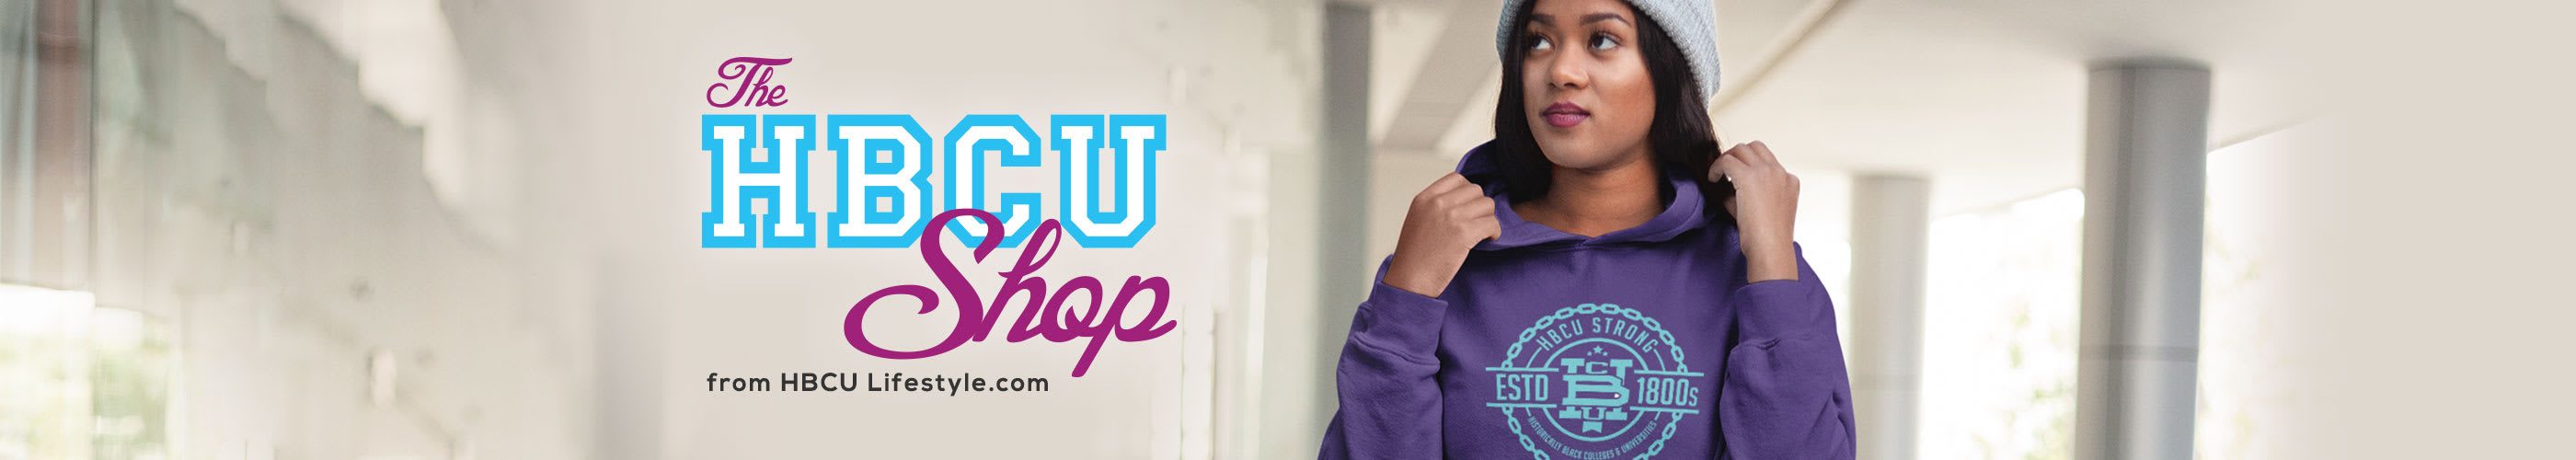 
A female graduate of a Historically Black College is wearing a purple and teal HBCU Strong hoodie in a brightly lit walkway